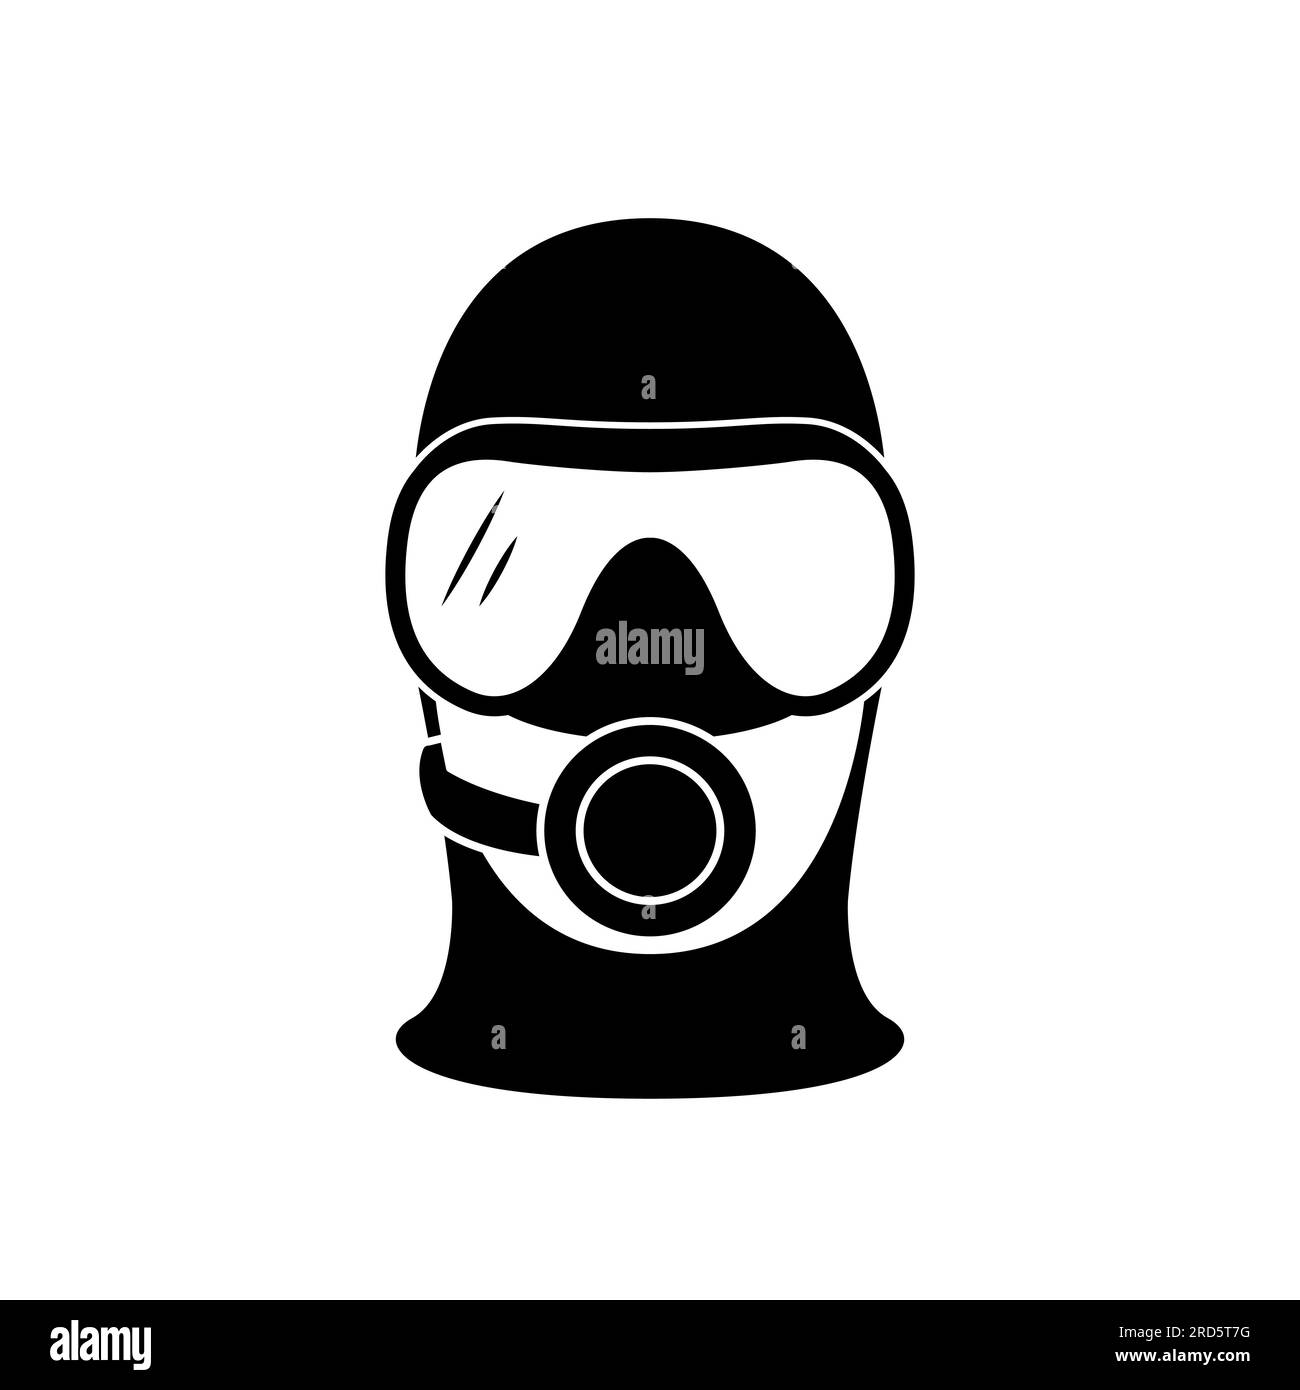 Scuba diver icon. Head silhouette with diving mask. Vector illustration ...